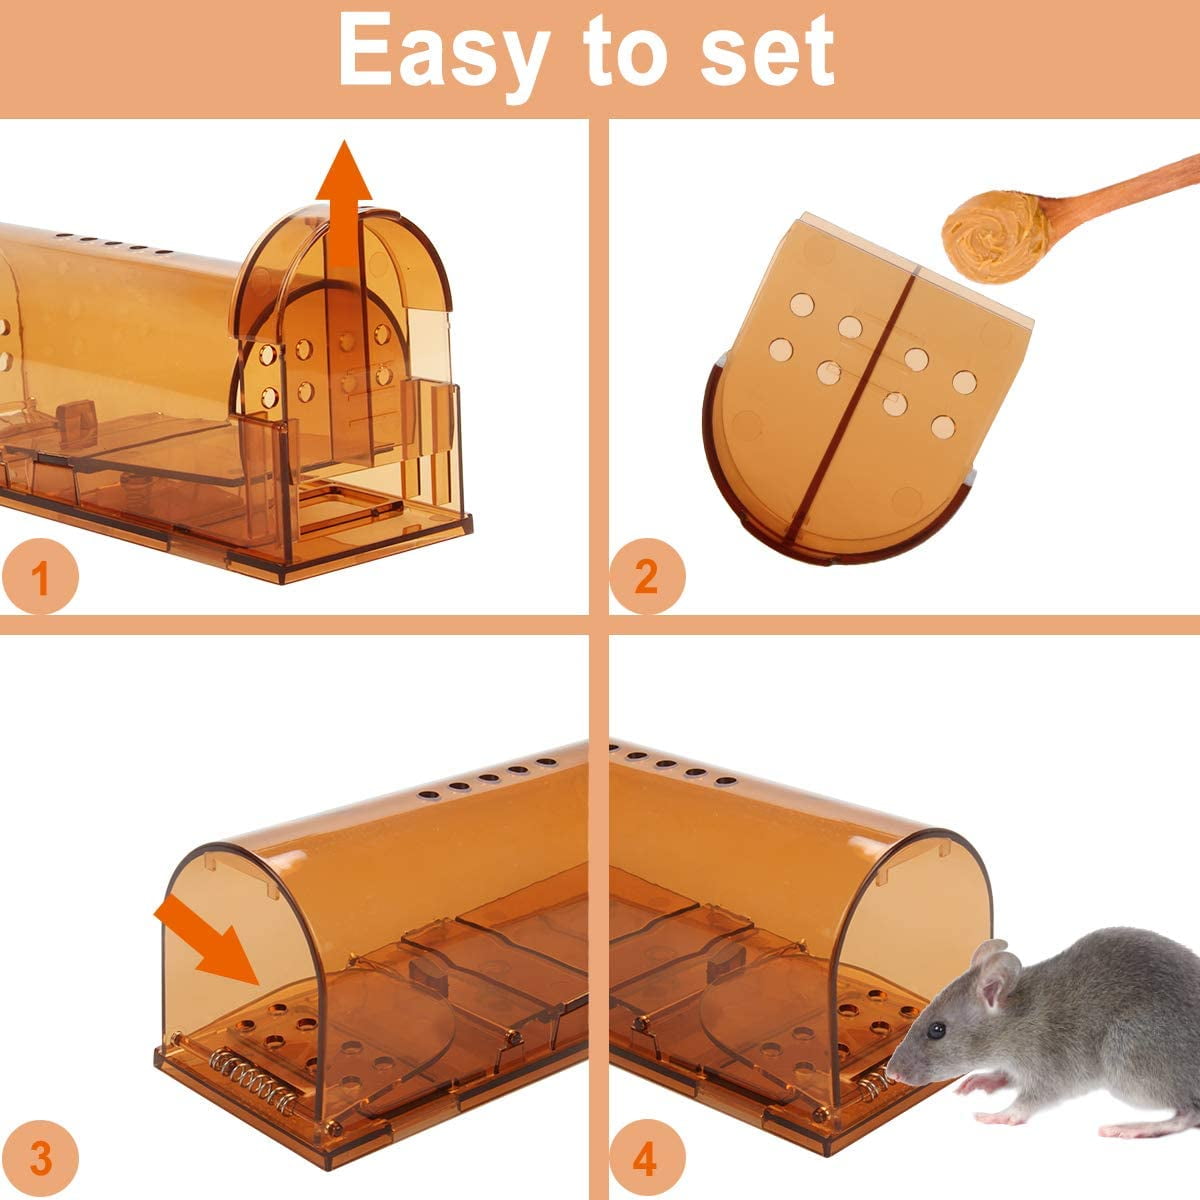 KEPLIN Humane Mouse Trap 1pk - No Kill Mice Traps, Pets and Children  Friendly, Catch and Release Animal, Rodent and Chipmunk Trap, Indoor /  Outdoor 